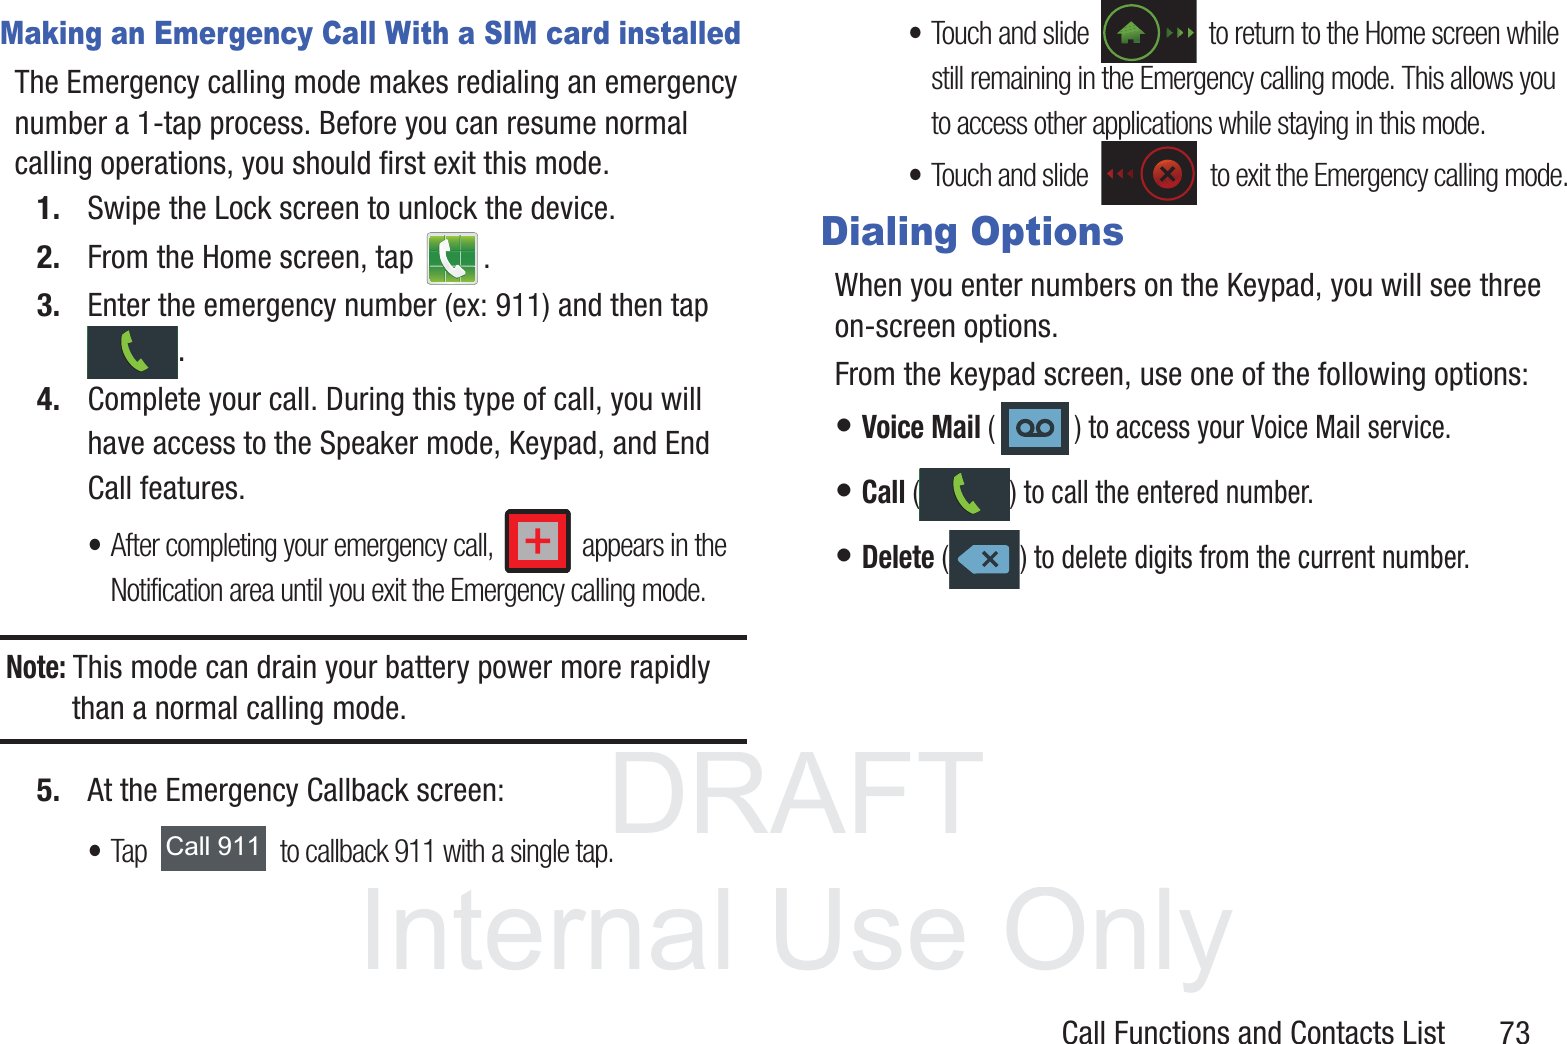 DRAFT InternalUse OnlyCall Functions and Contacts List       73Making an Emergency Call With a SIM card installedThe Emergency calling mode makes redialing an emergency number a 1-tap process. Before you can resume normal calling operations, you should first exit this mode.1. Swipe the Lock screen to unlock the device.2. From the Home screen, tap  . 3. Enter the emergency number (ex: 911) and then tap .4. Complete your call. During this type of call, you will have access to the Speaker mode, Keypad, and End Call features. •After completing your emergency call,   appears in the Notification area until you exit the Emergency calling mode.Note: This mode can drain your battery power more rapidly than a normal calling mode. 5. At the Emergency Callback screen:•Tap   to callback 911 with a single tap.•Touch and slide   to return to the Home screen while still remaining in the Emergency calling mode. This allows you to access other applications while staying in this mode.•Touch and slide   to exit the Emergency calling mode.Dialing OptionsWhen you enter numbers on the Keypad, you will see three on-screen options. From the keypad screen, use one of the following options:• Voice Mail ( ) to access your Voice Mail service.• Call ( ) to call the entered number.• Delete ( ) to delete digits from the current number.&amp;DOO